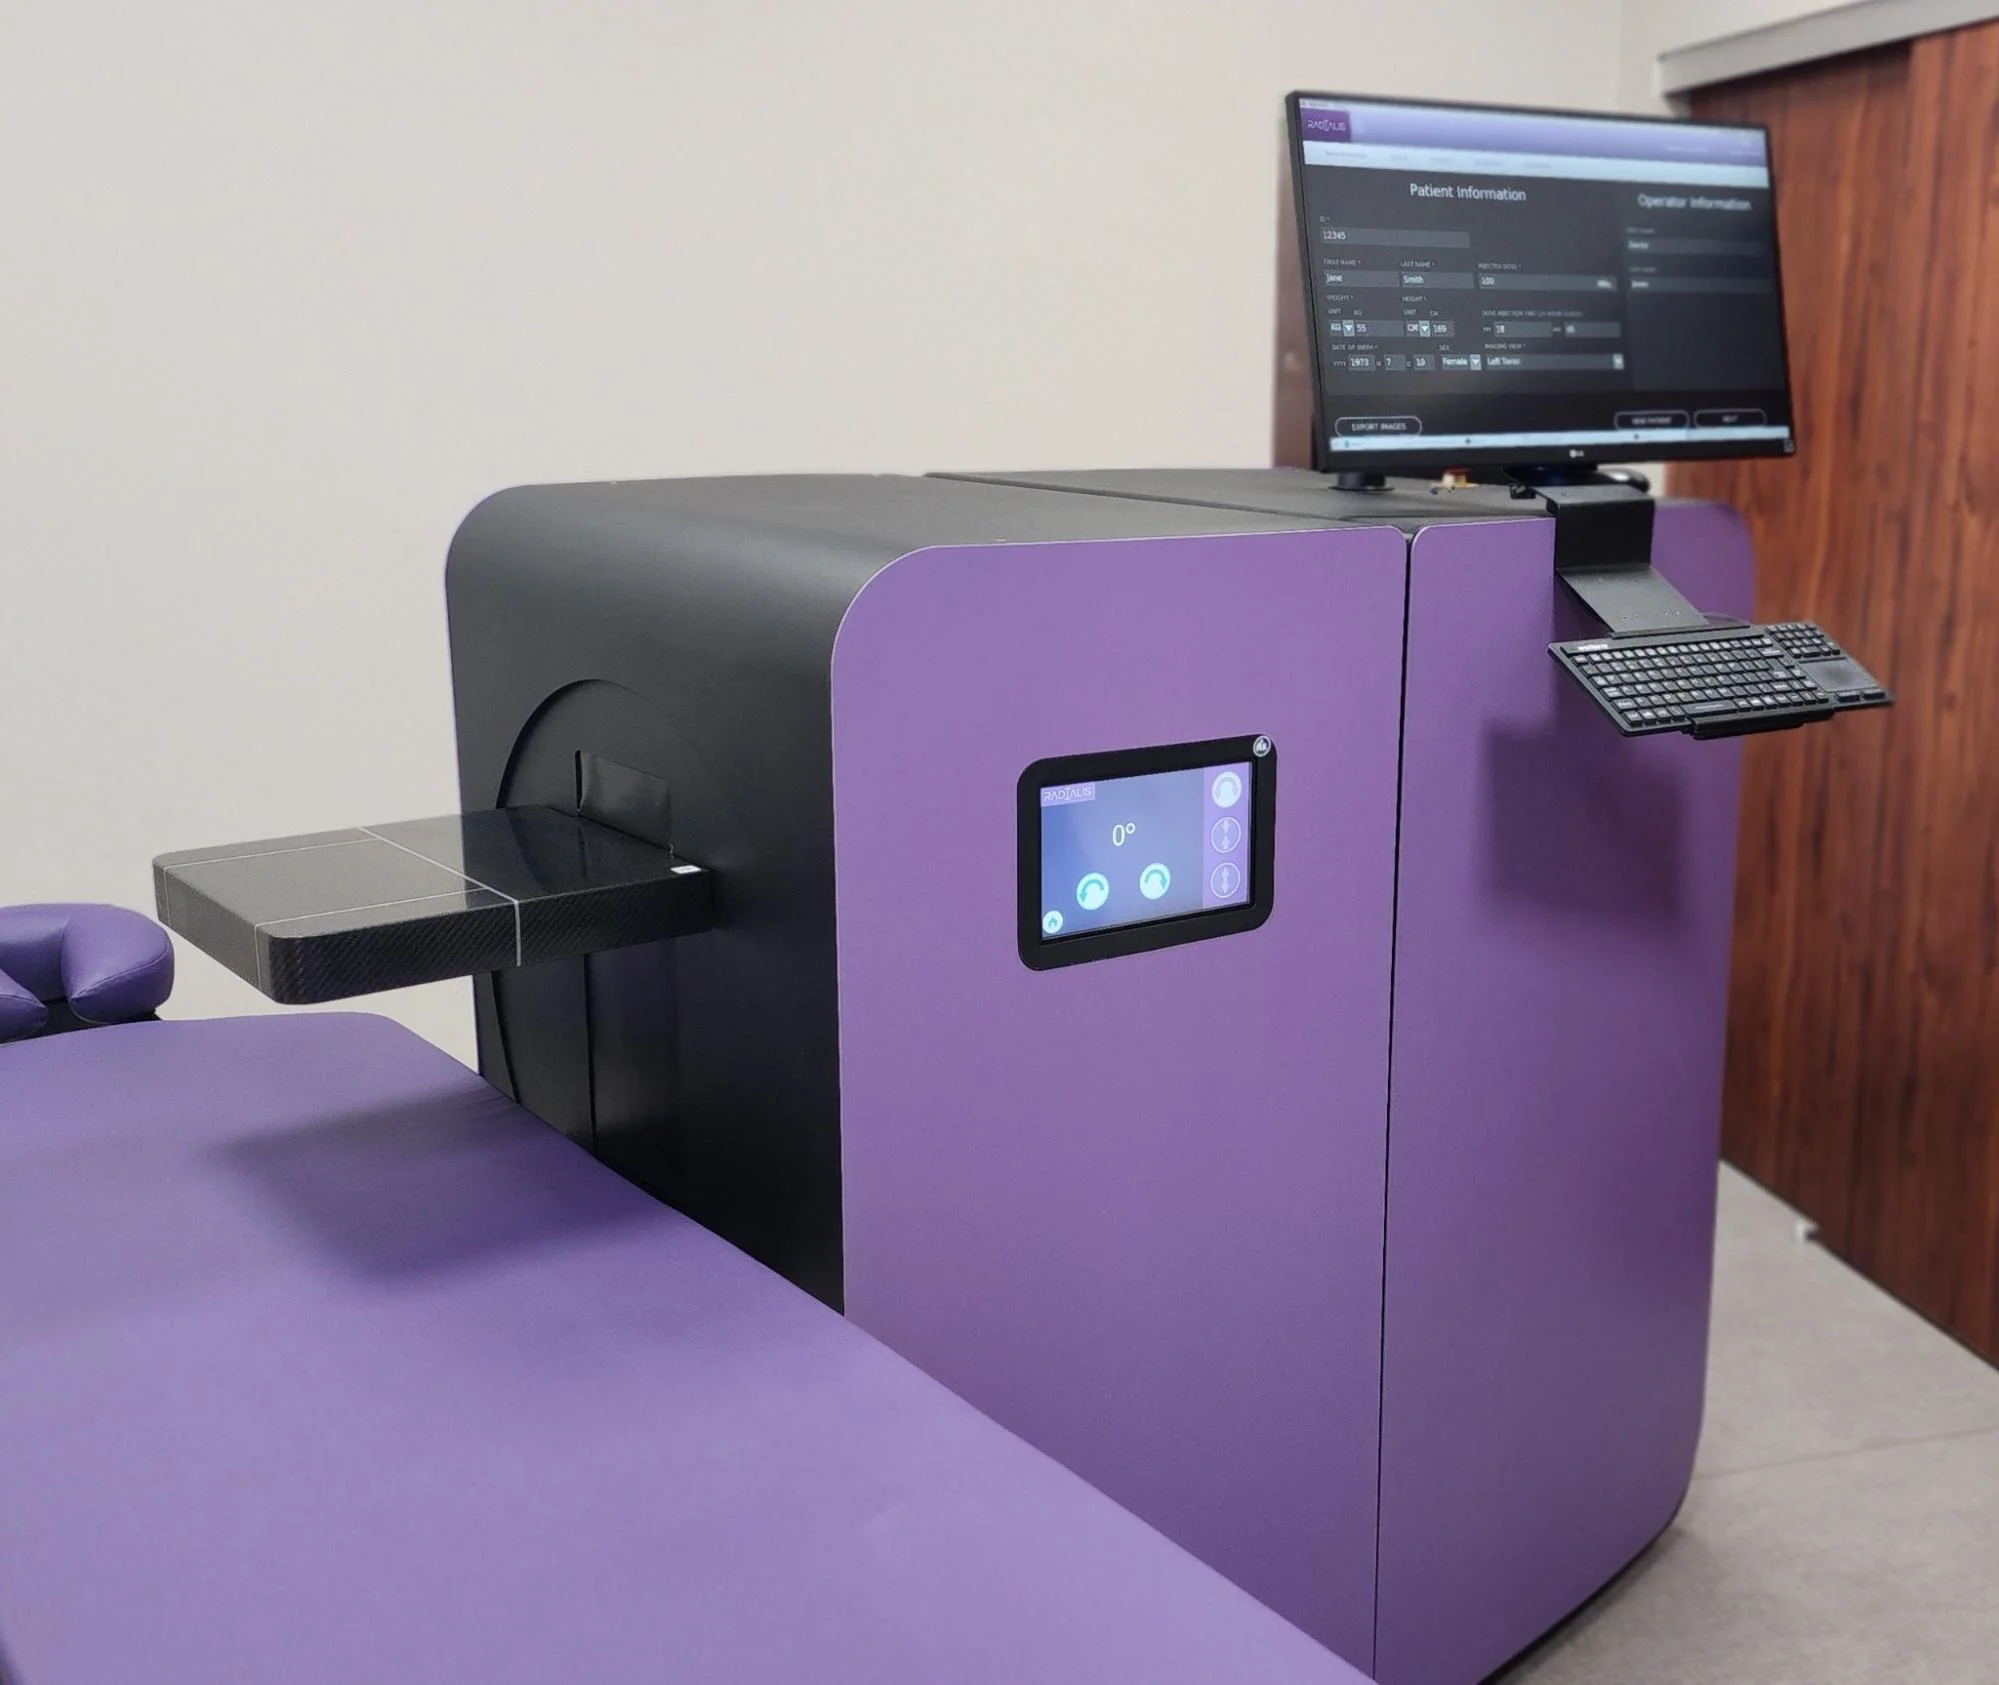 The Radialis PET Imager installed at a Pittsburgh health center.